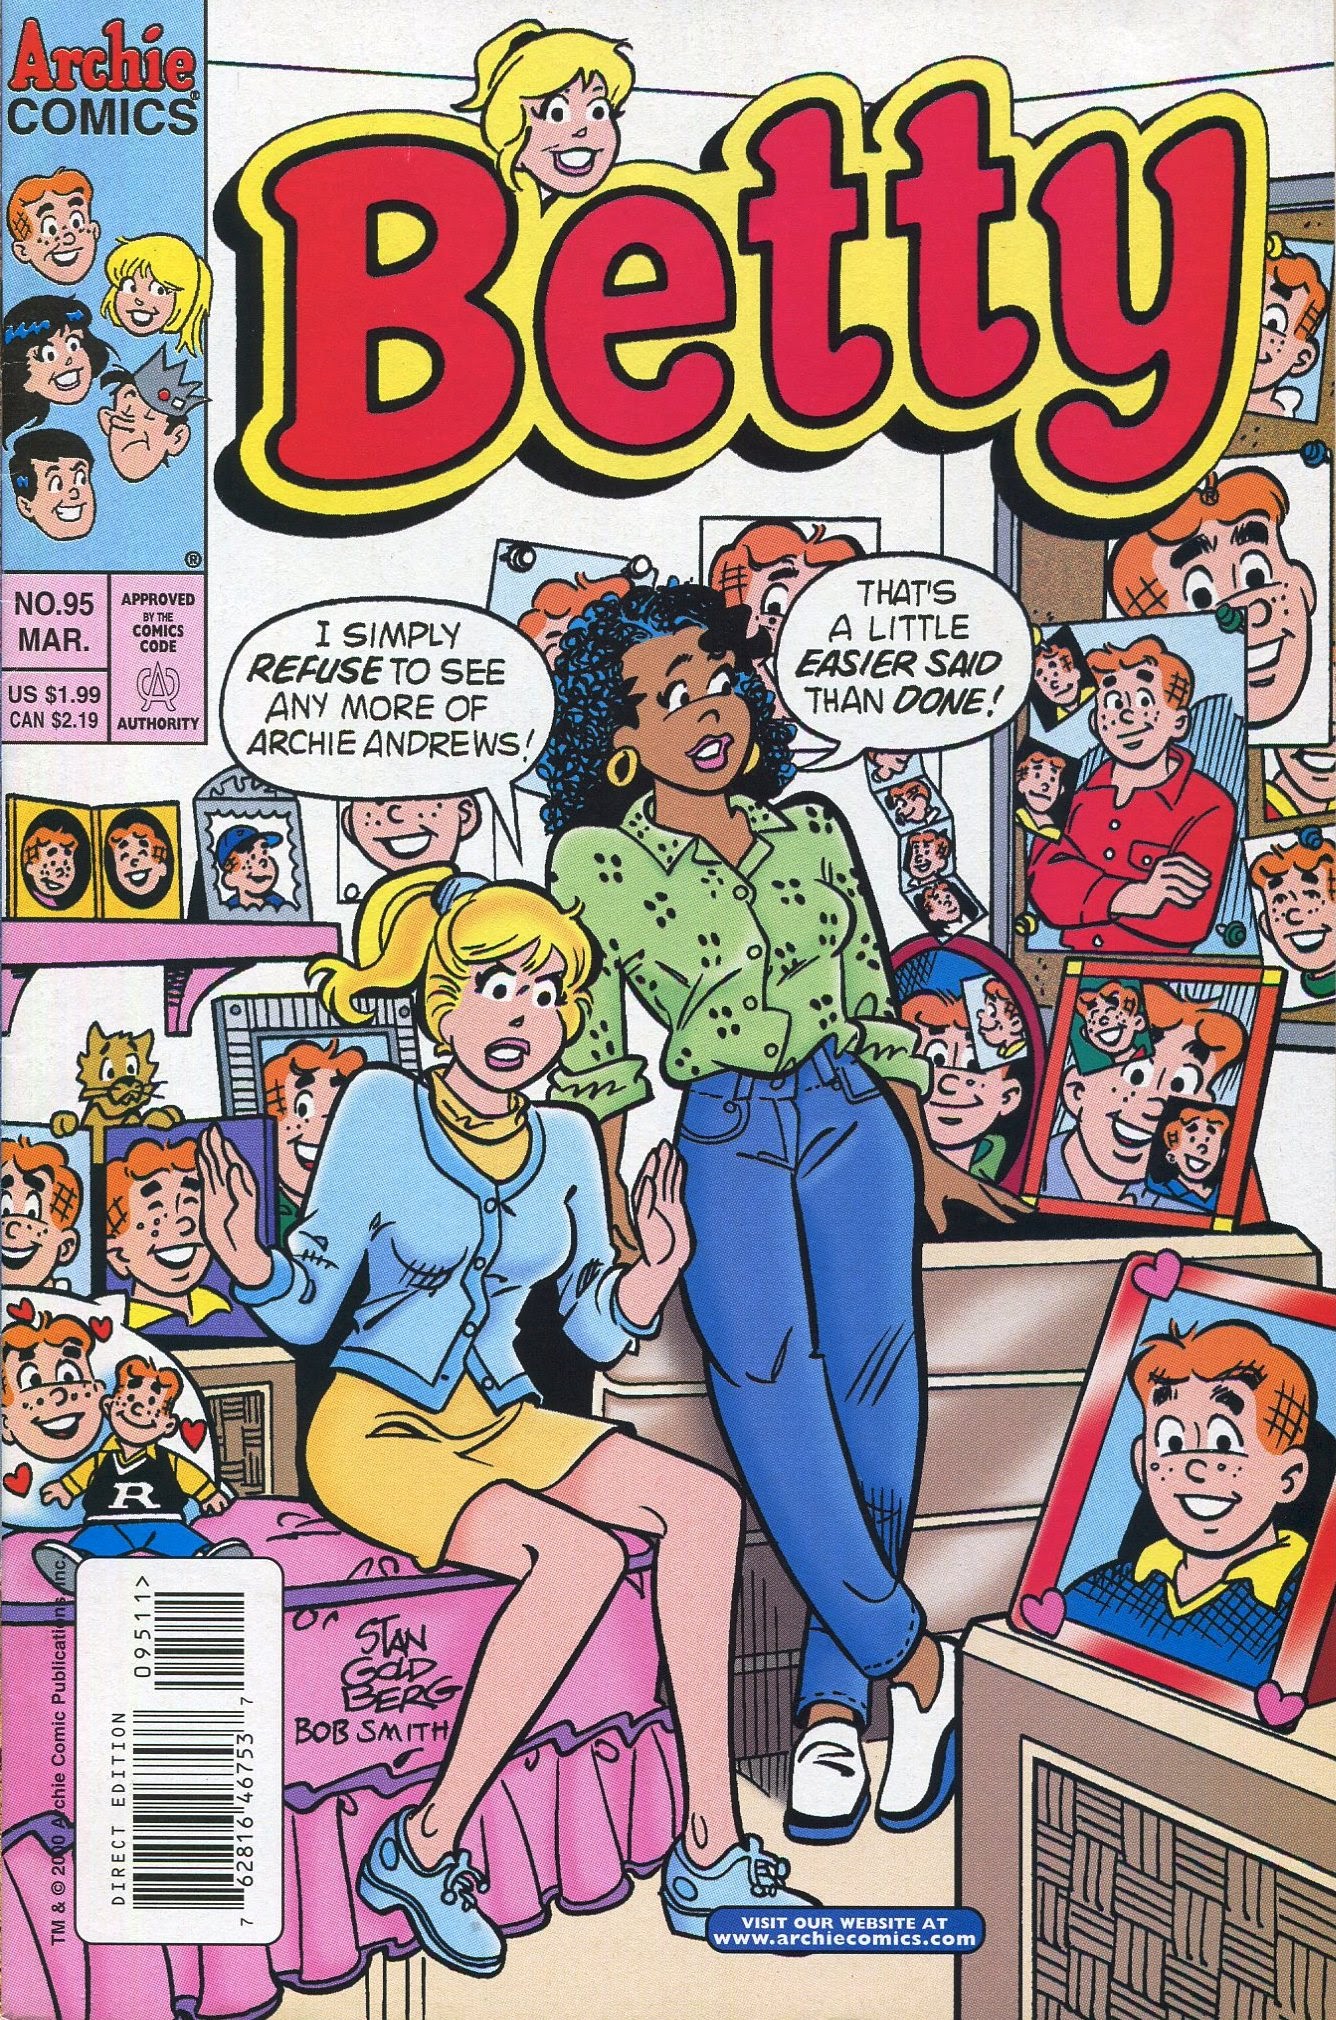 Read online Betty comic -  Issue #95 - 1